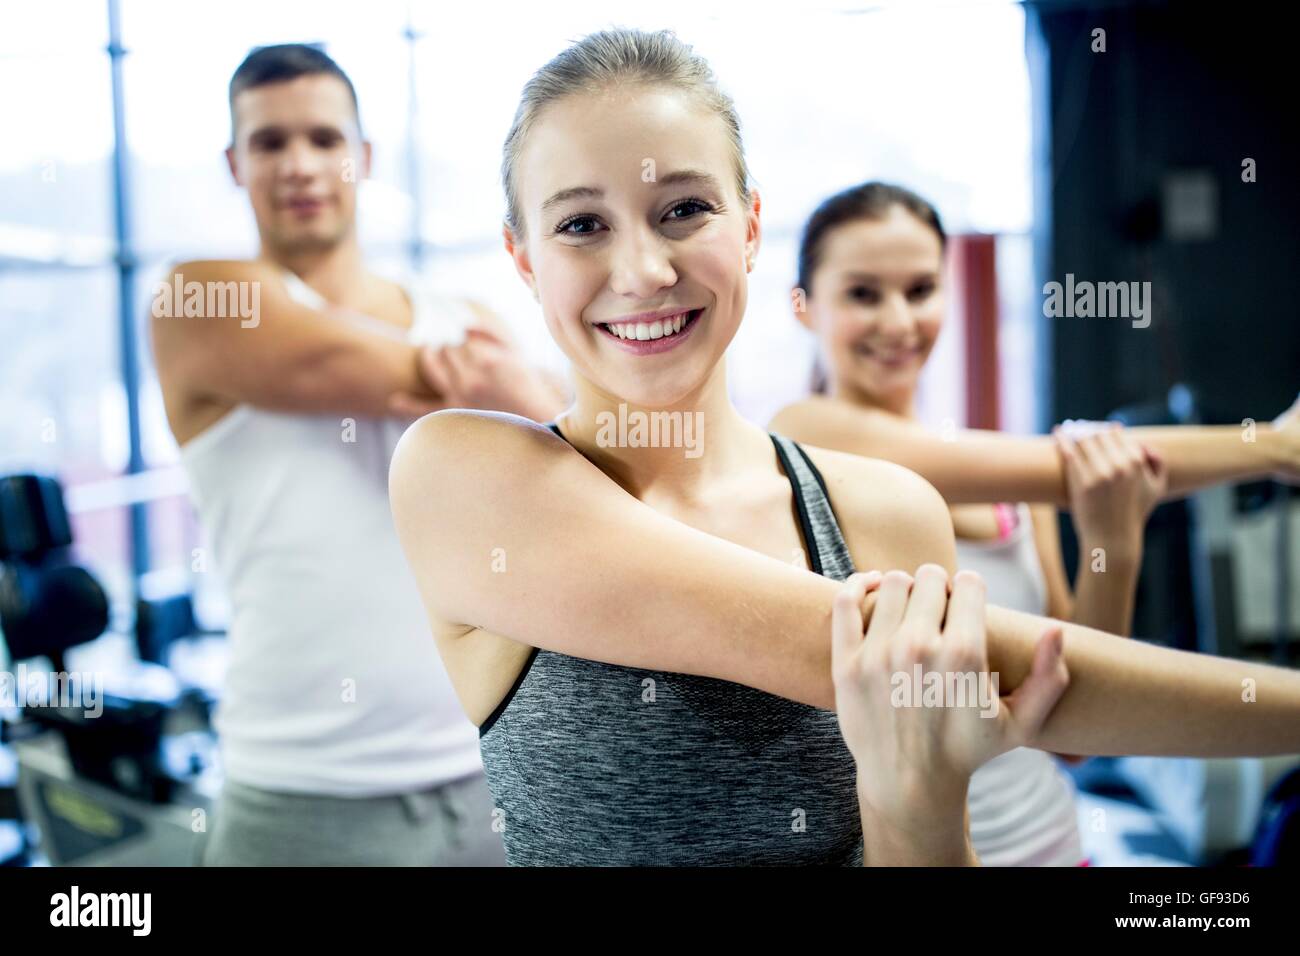 PROPERTY RELEASED. MODEL RELEASED. Young man and women doing warm up exercise in gym. Stock Photo